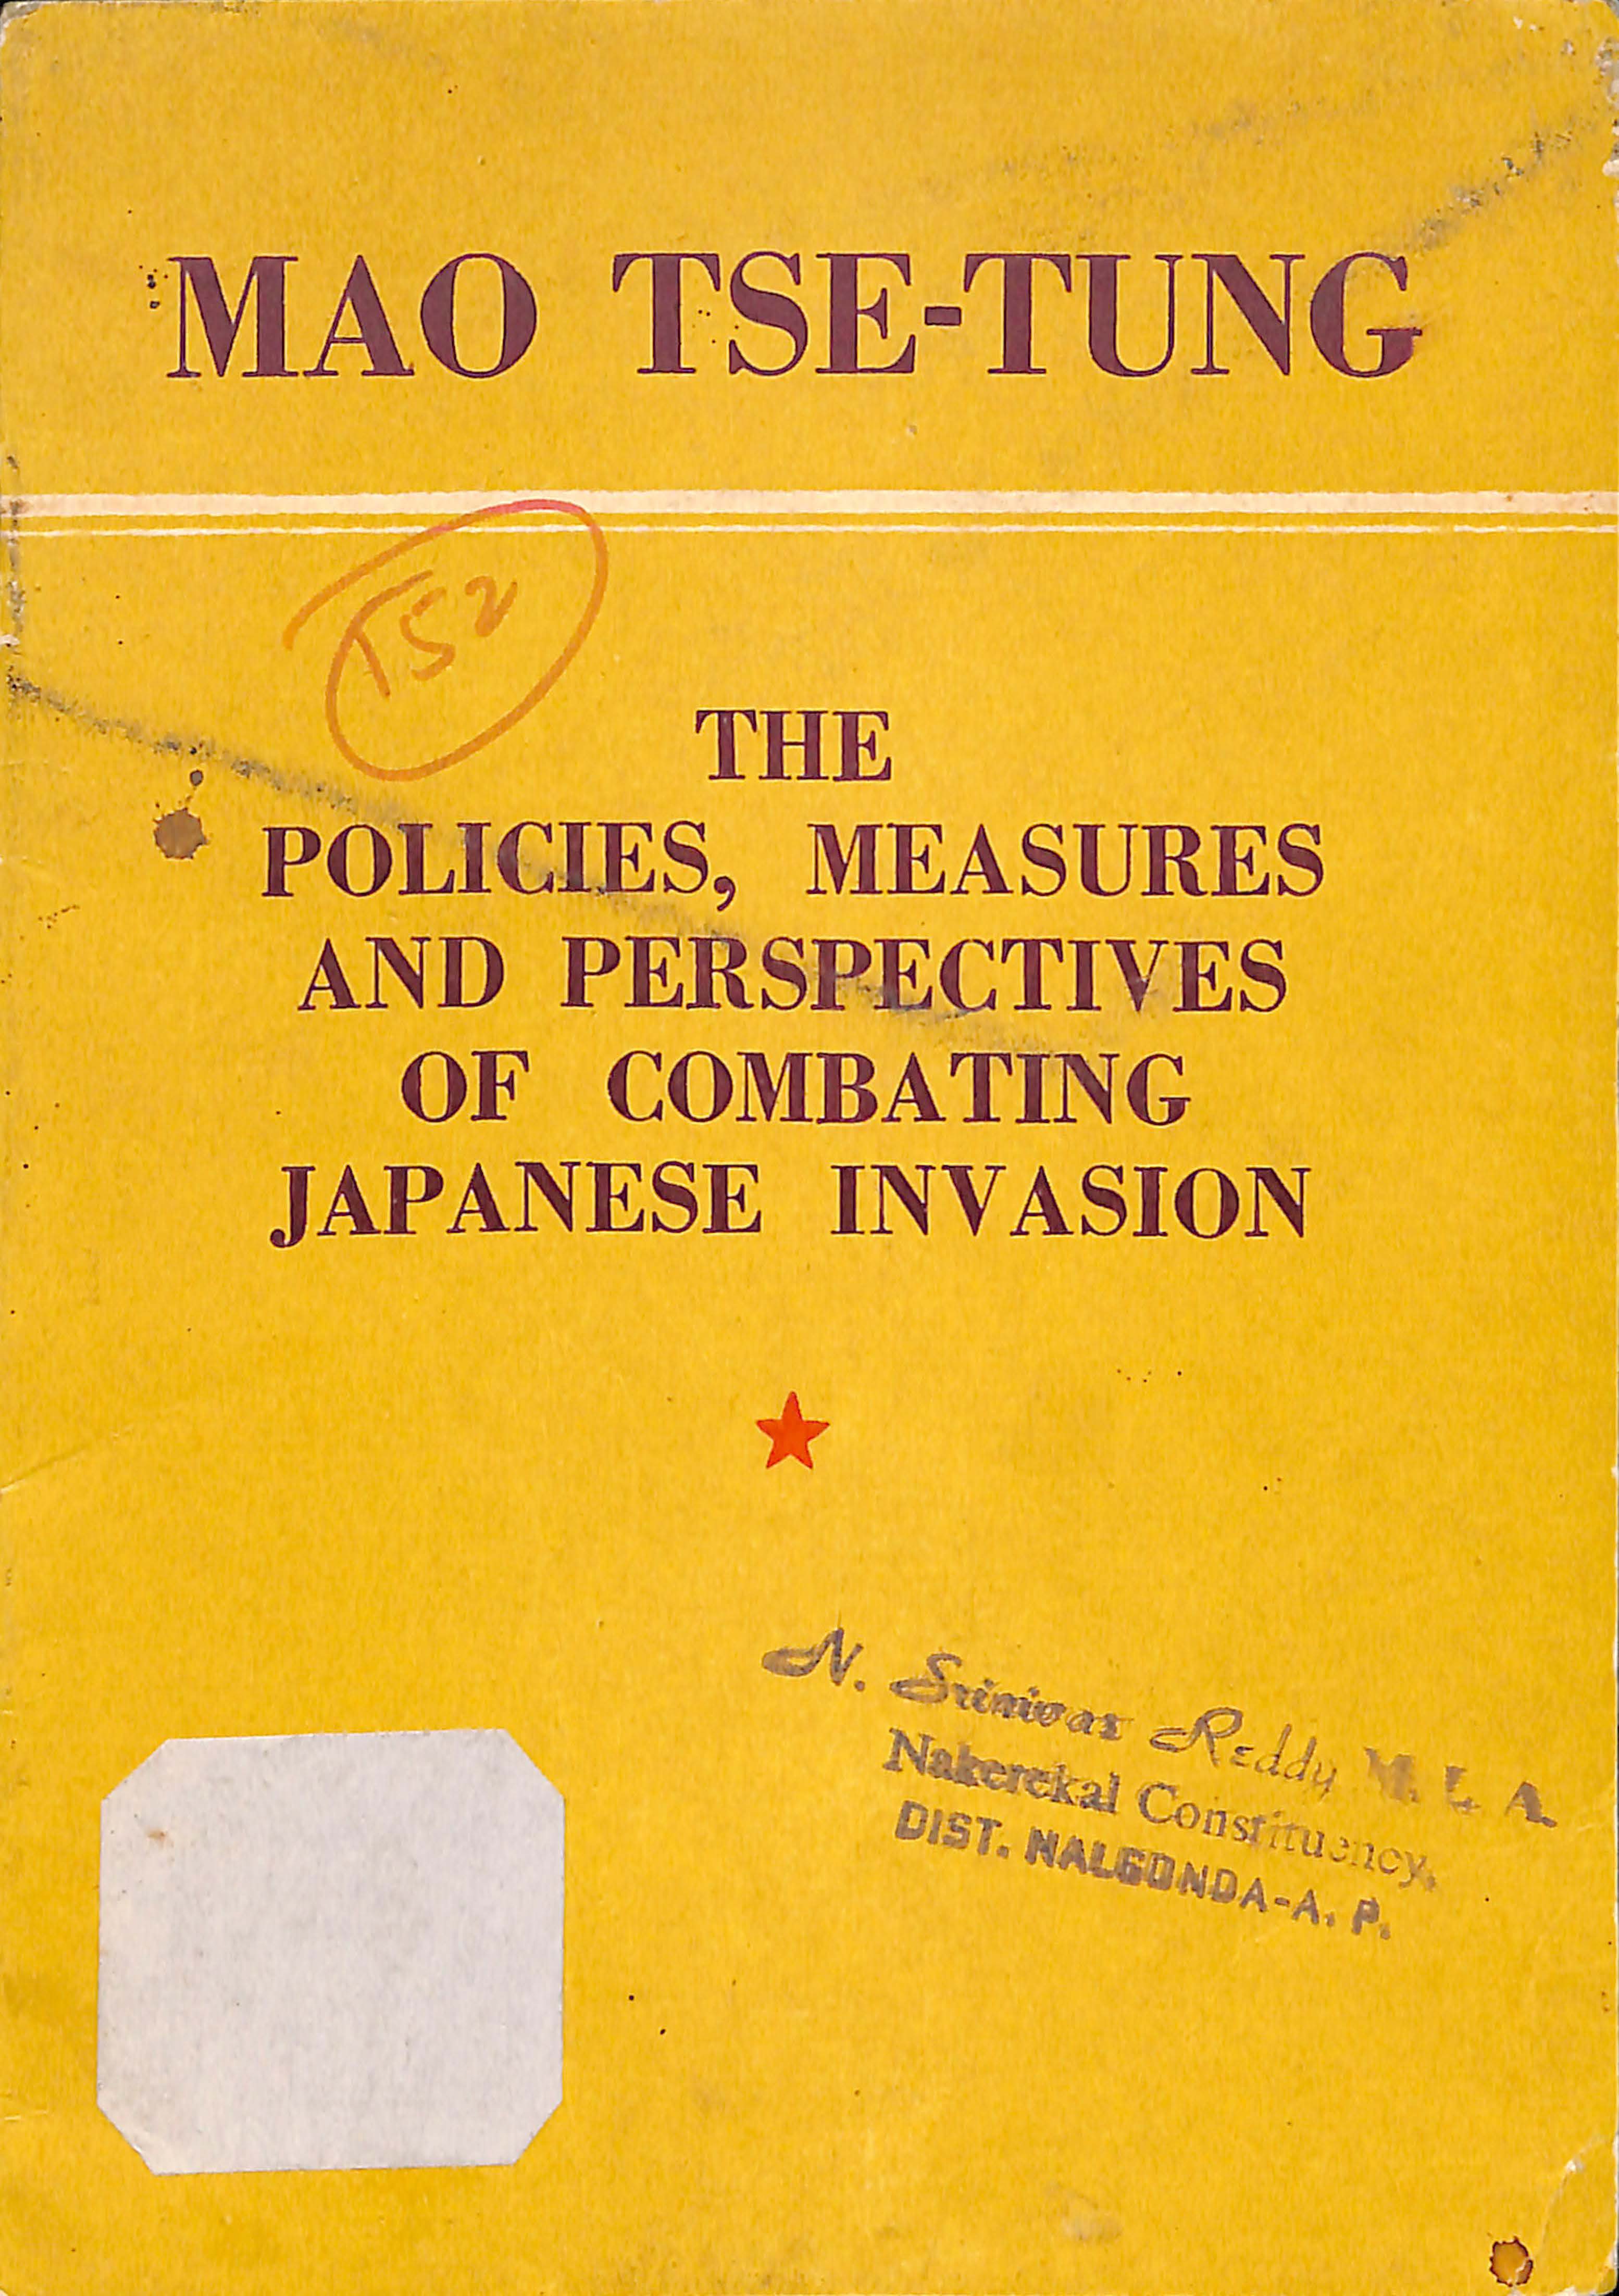 The policies,measures and perspectives of combating japaness invasion (MAO TSE-TUNG)